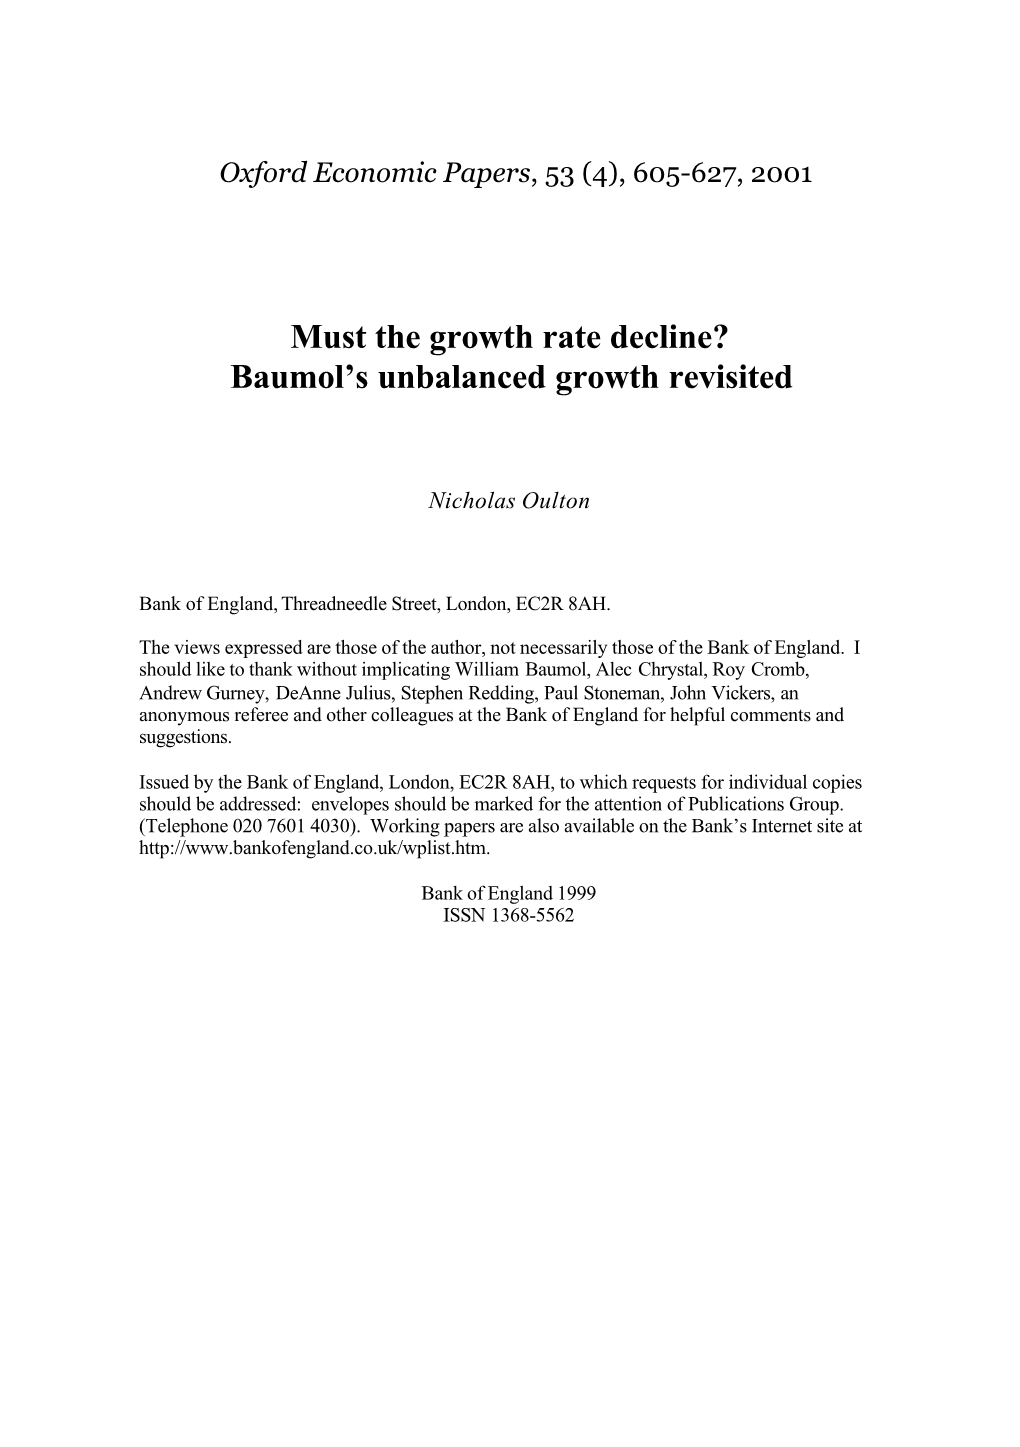 Must the Growth Rate Decline? Baumol's Unbalanced Growth Revisited